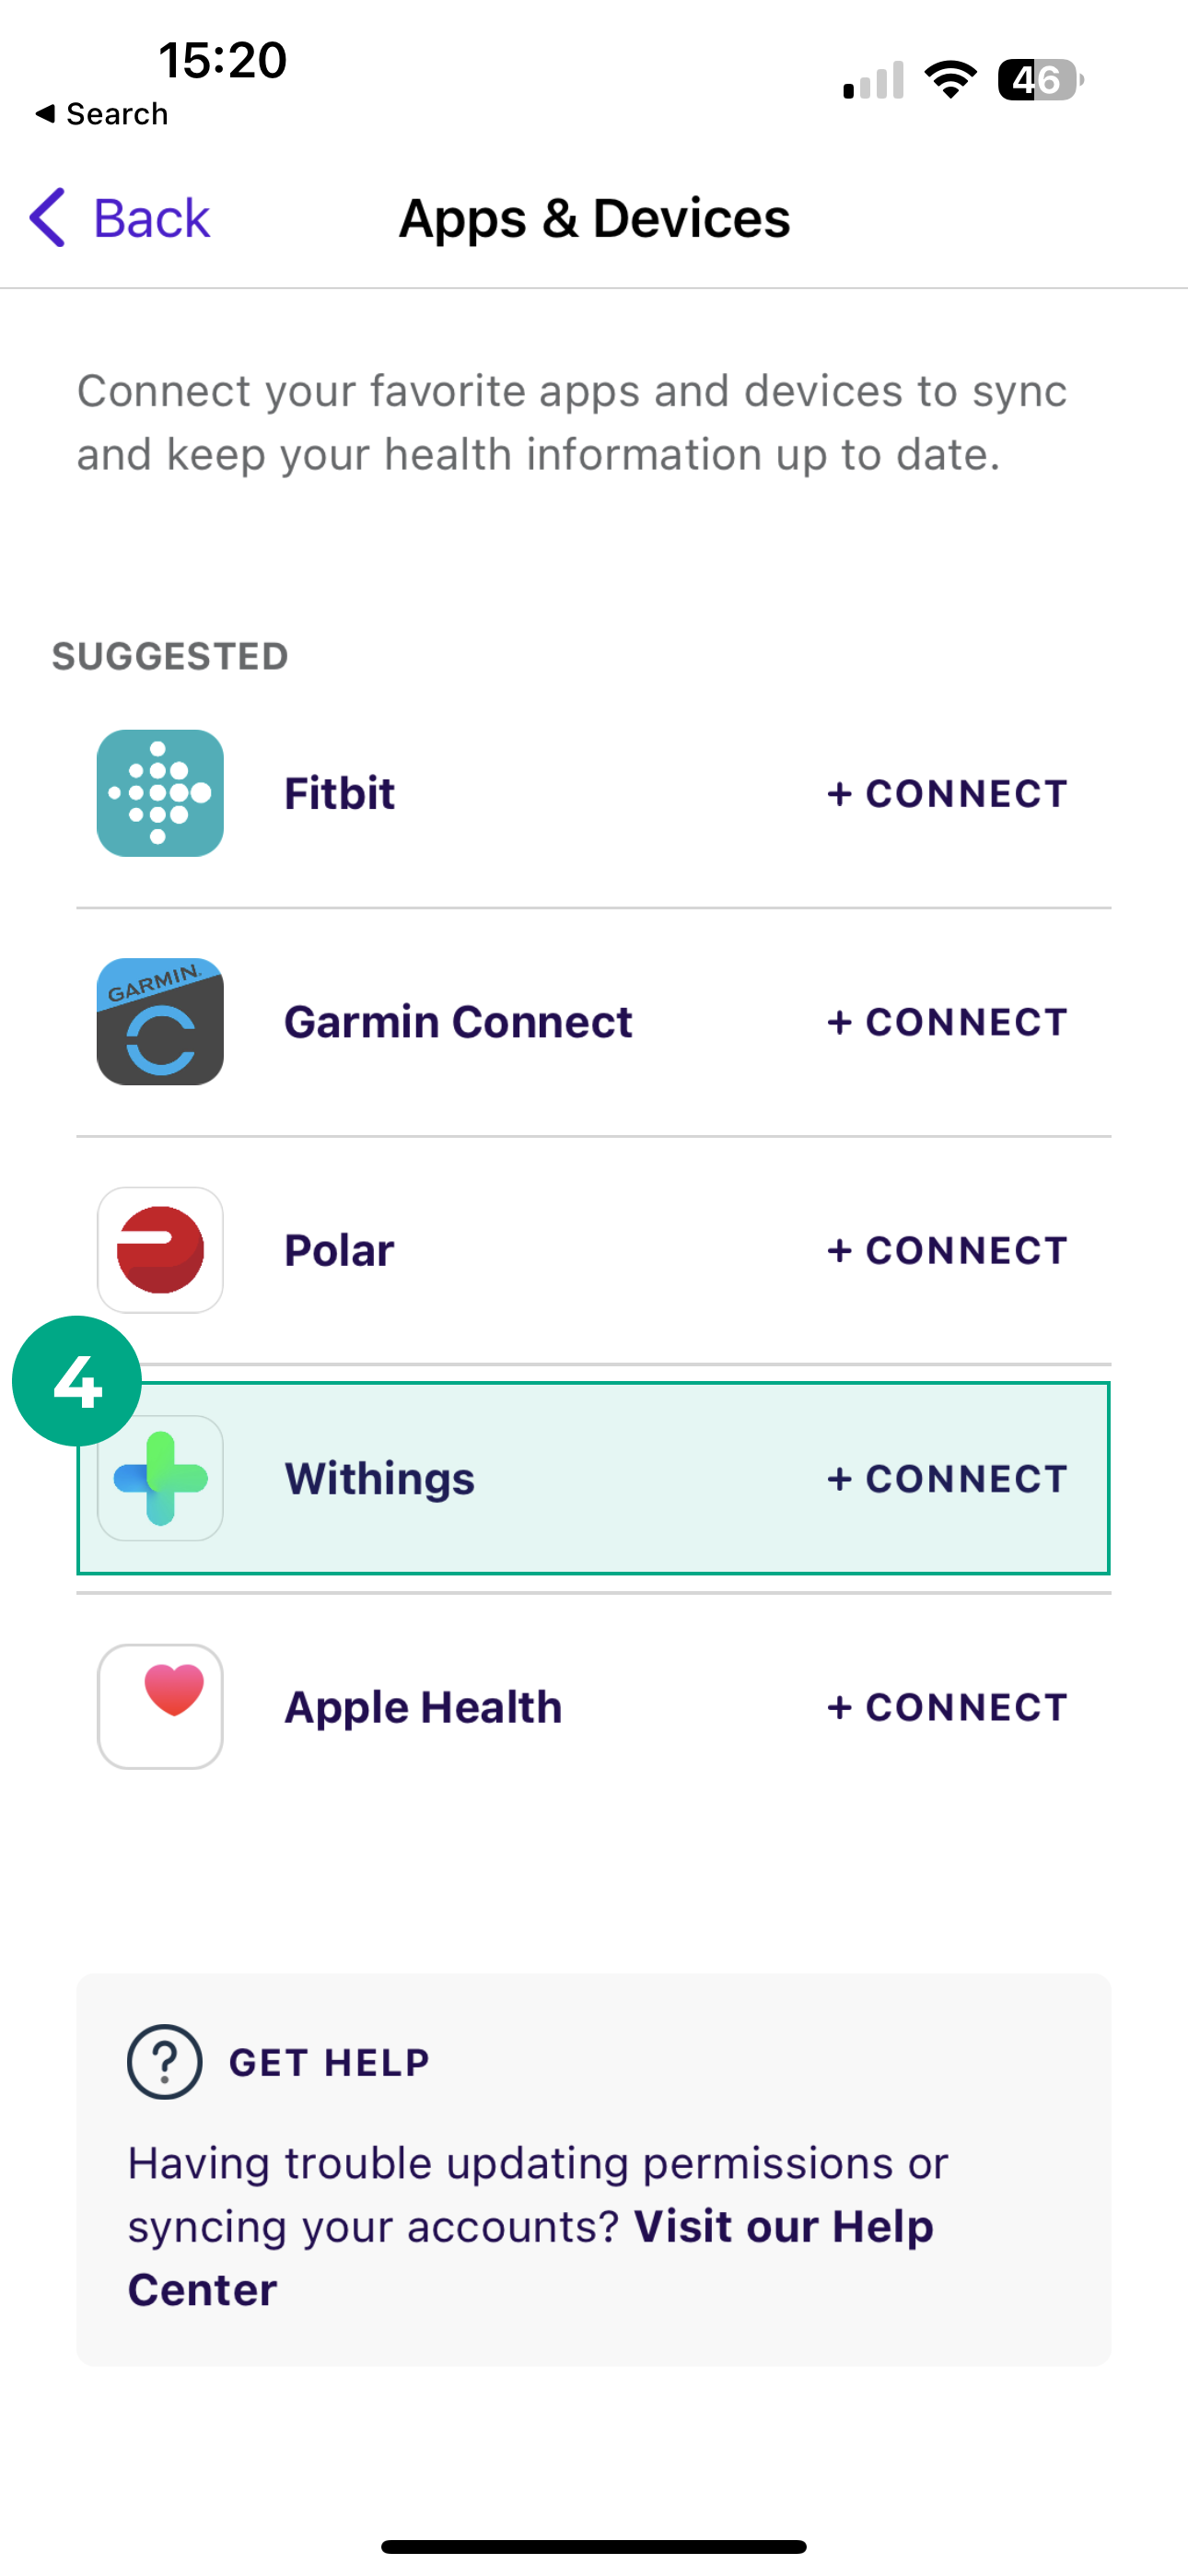 Suggested withings button highlighted in League's app apps and devices screen